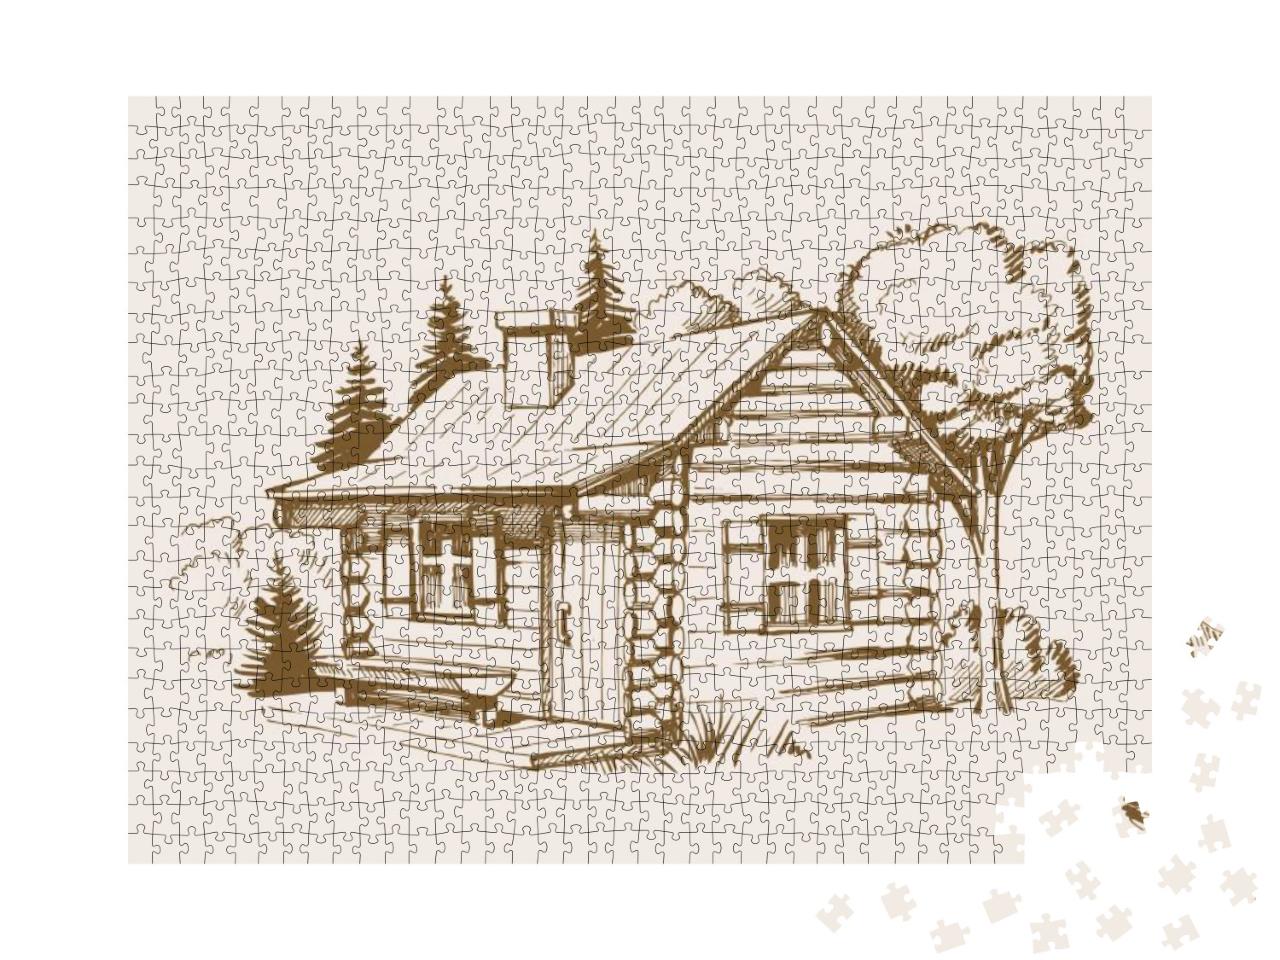 Hand Drawn Vector Illustration of Wooden House... Jigsaw Puzzle with 1000 pieces